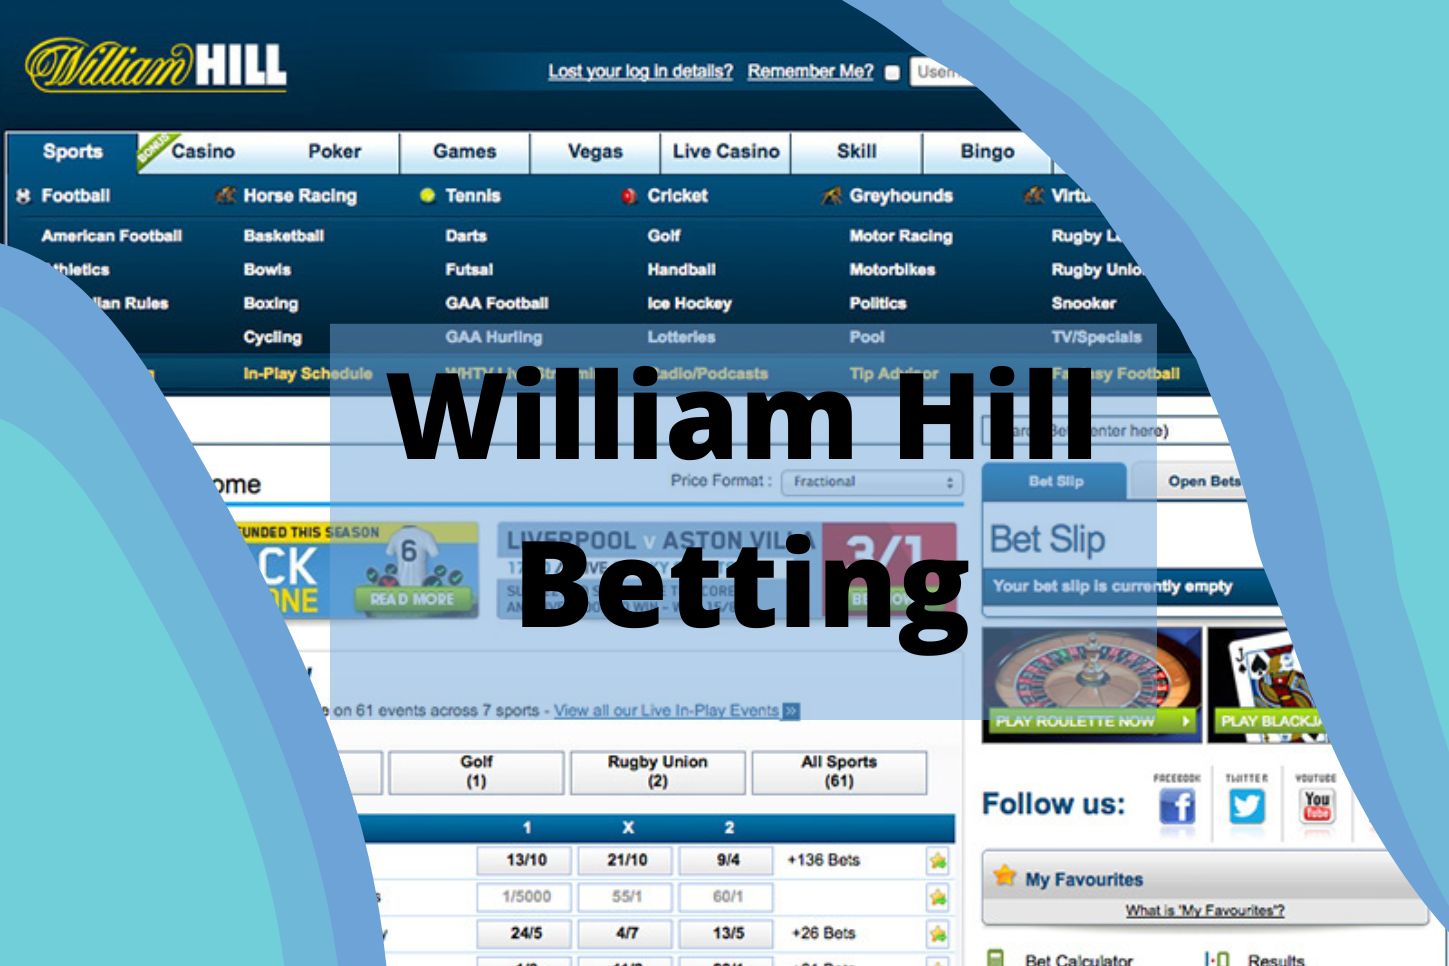 William Hill sports betting website discussion